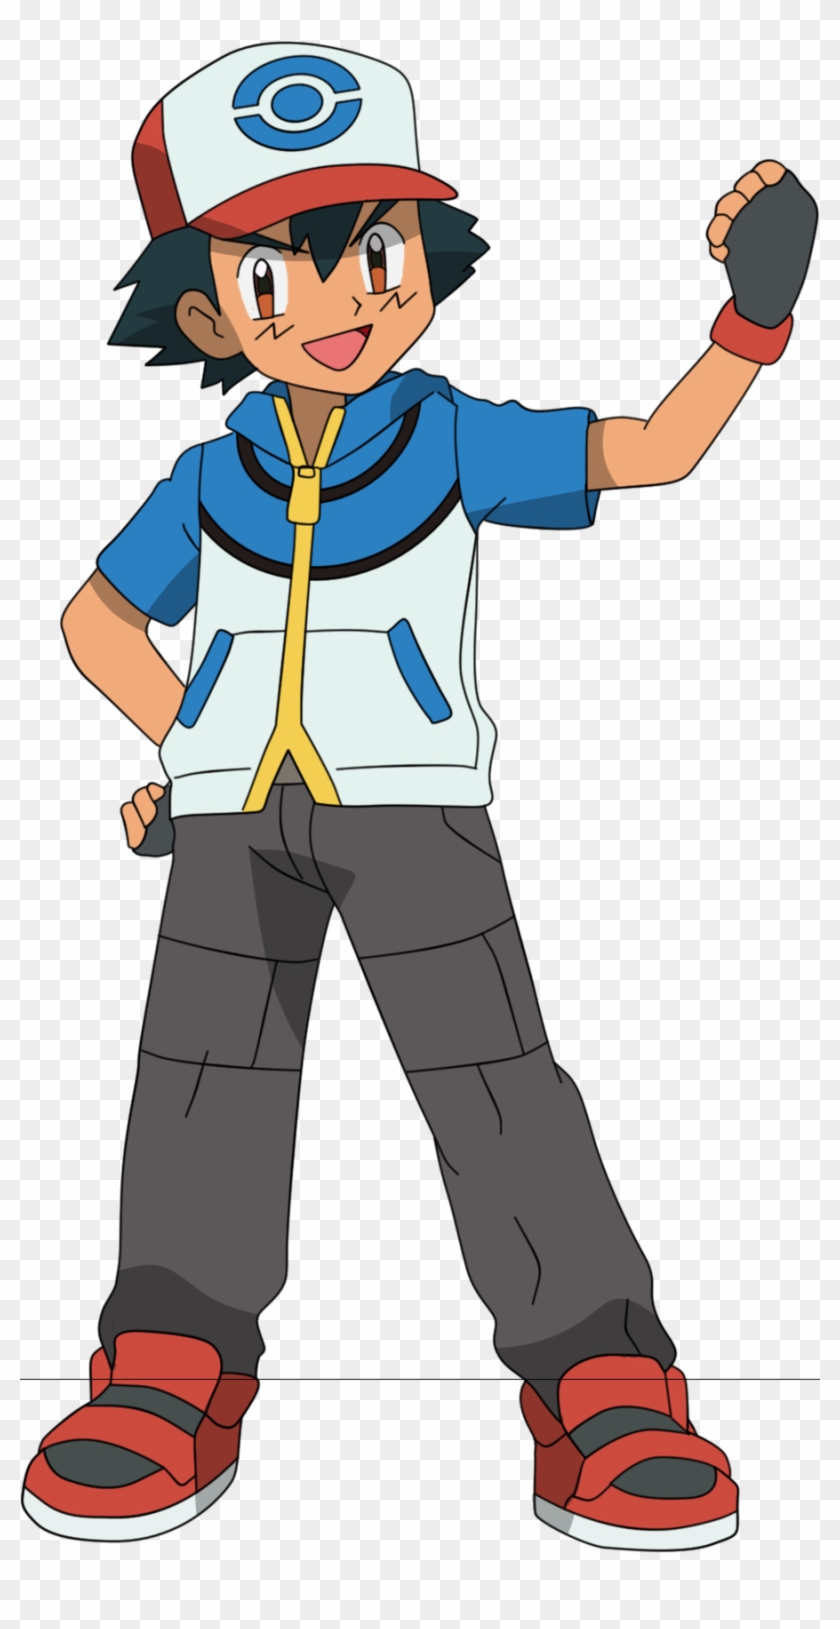 To All The Christians - Pokemon Ash Ketchum Png #582285